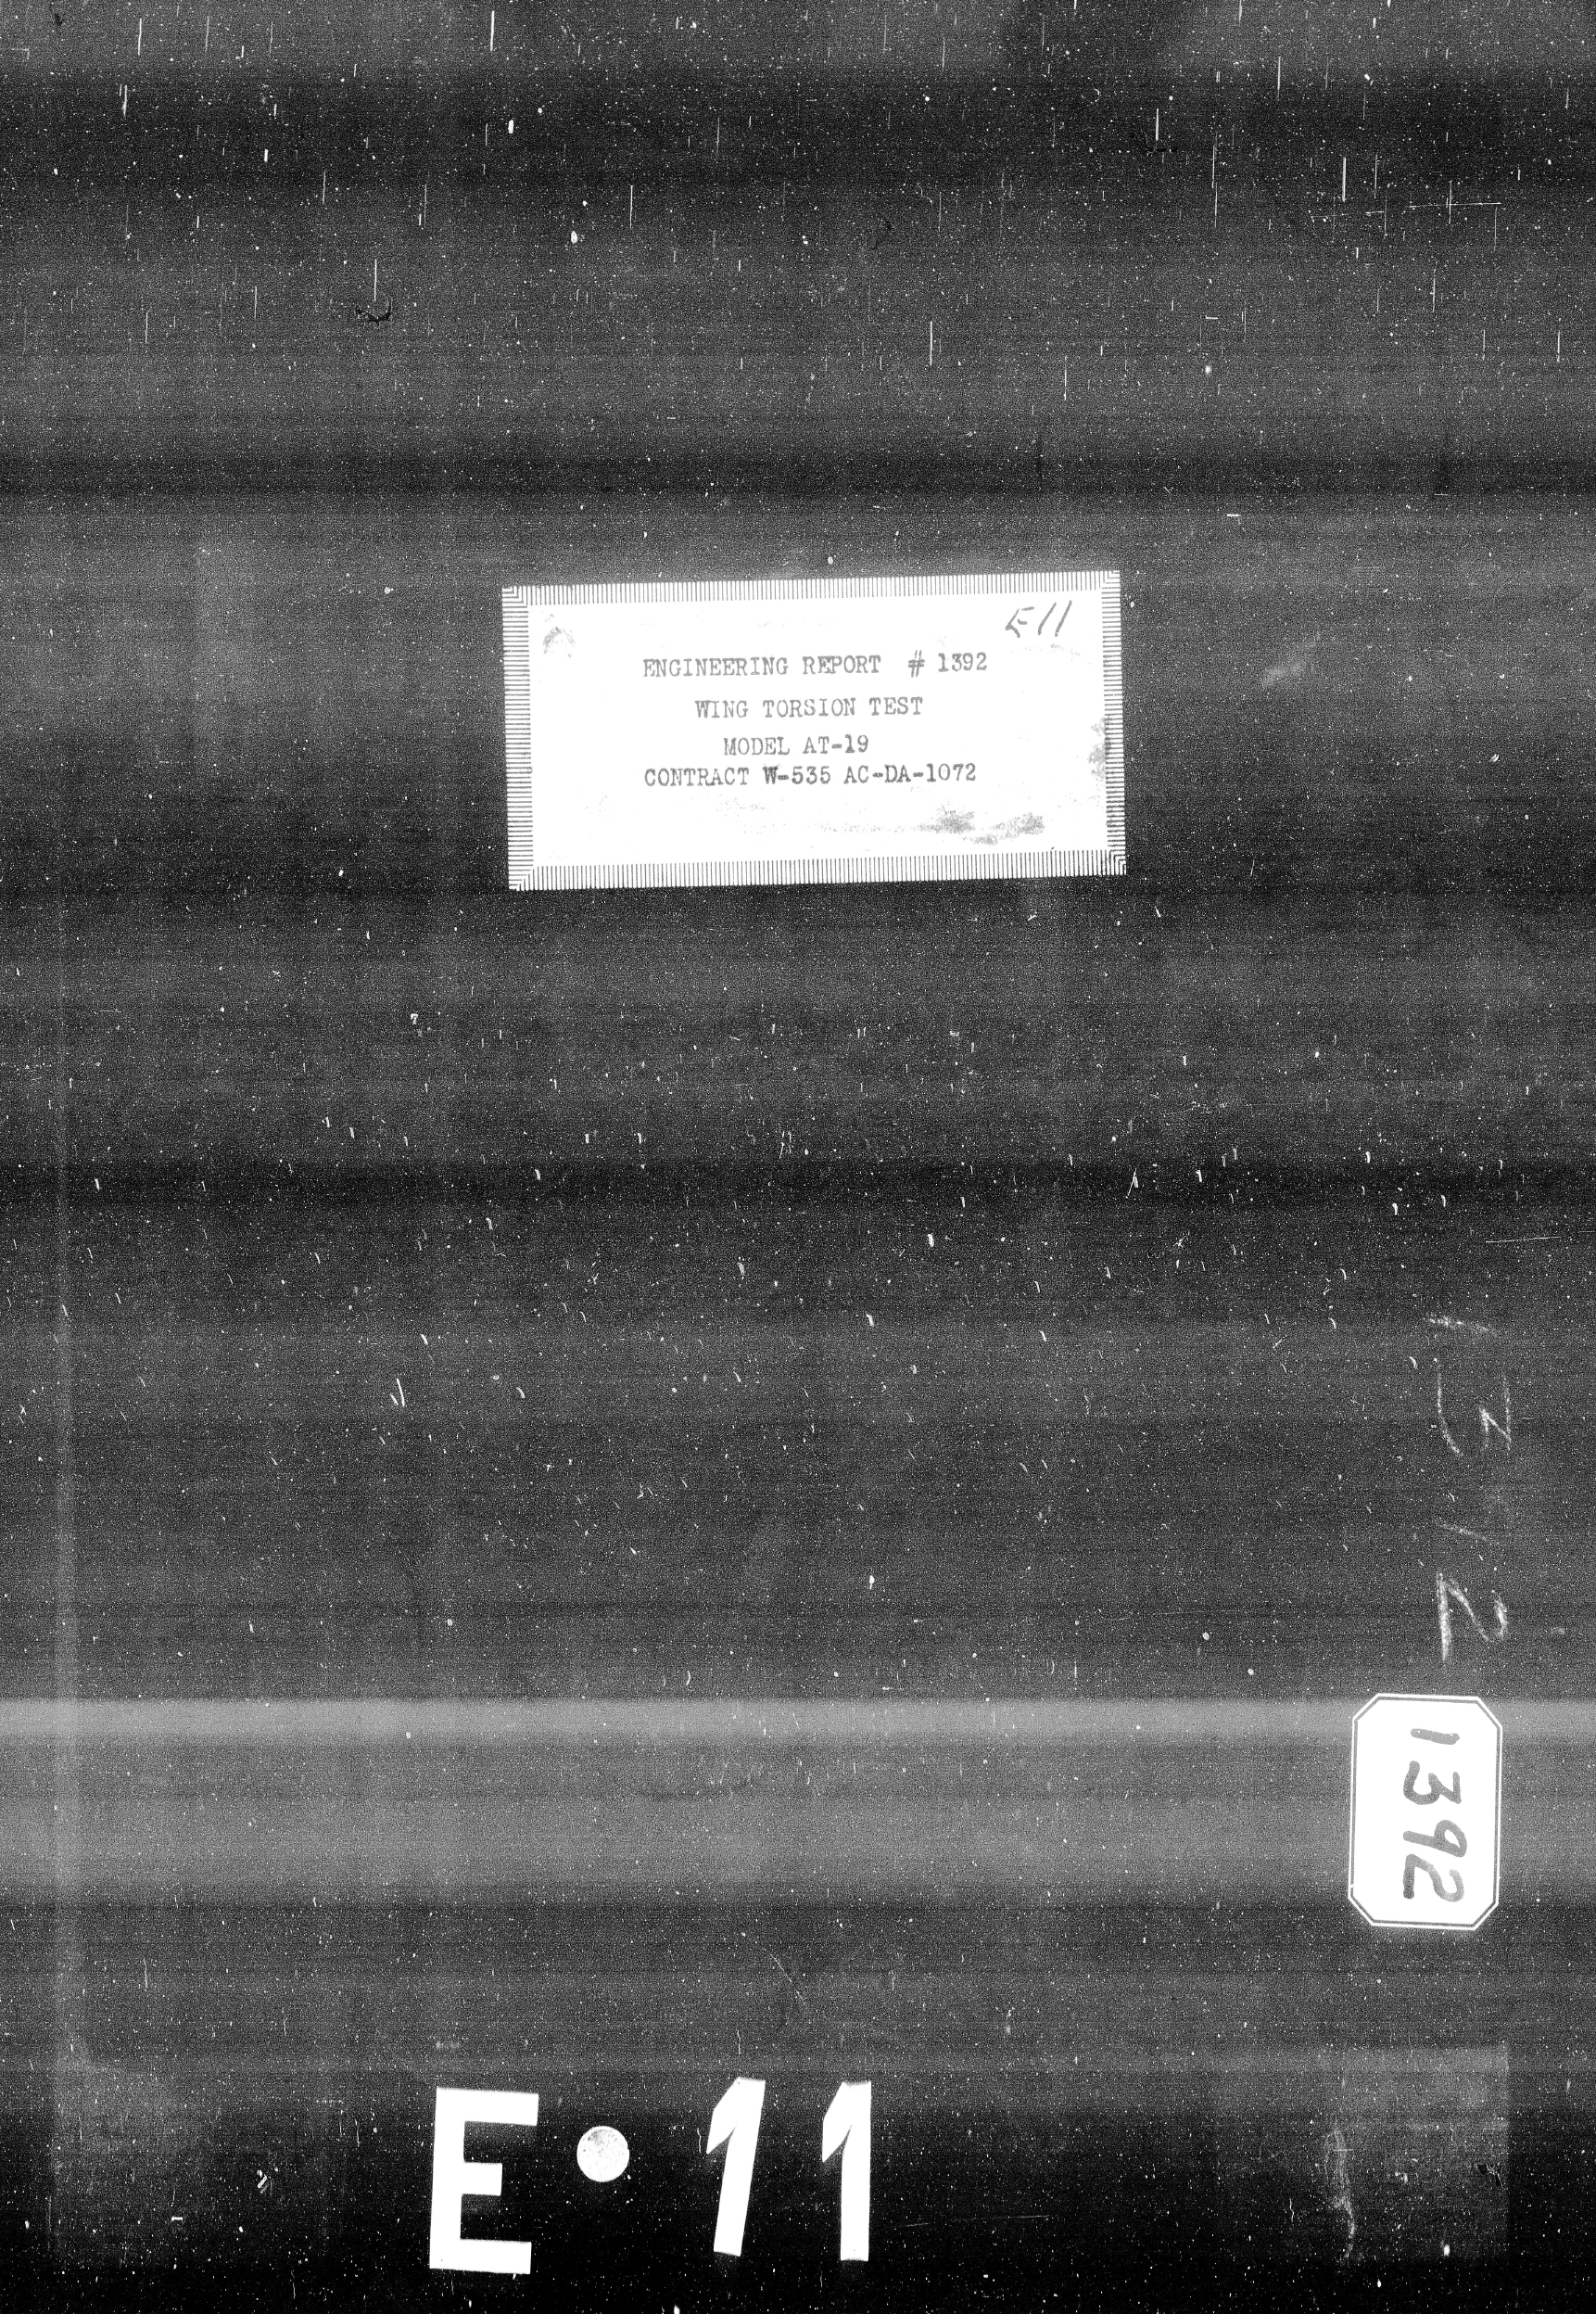 Sample page 1 from AirCorps Library document: Wing Torsion Tests for Model AT-19